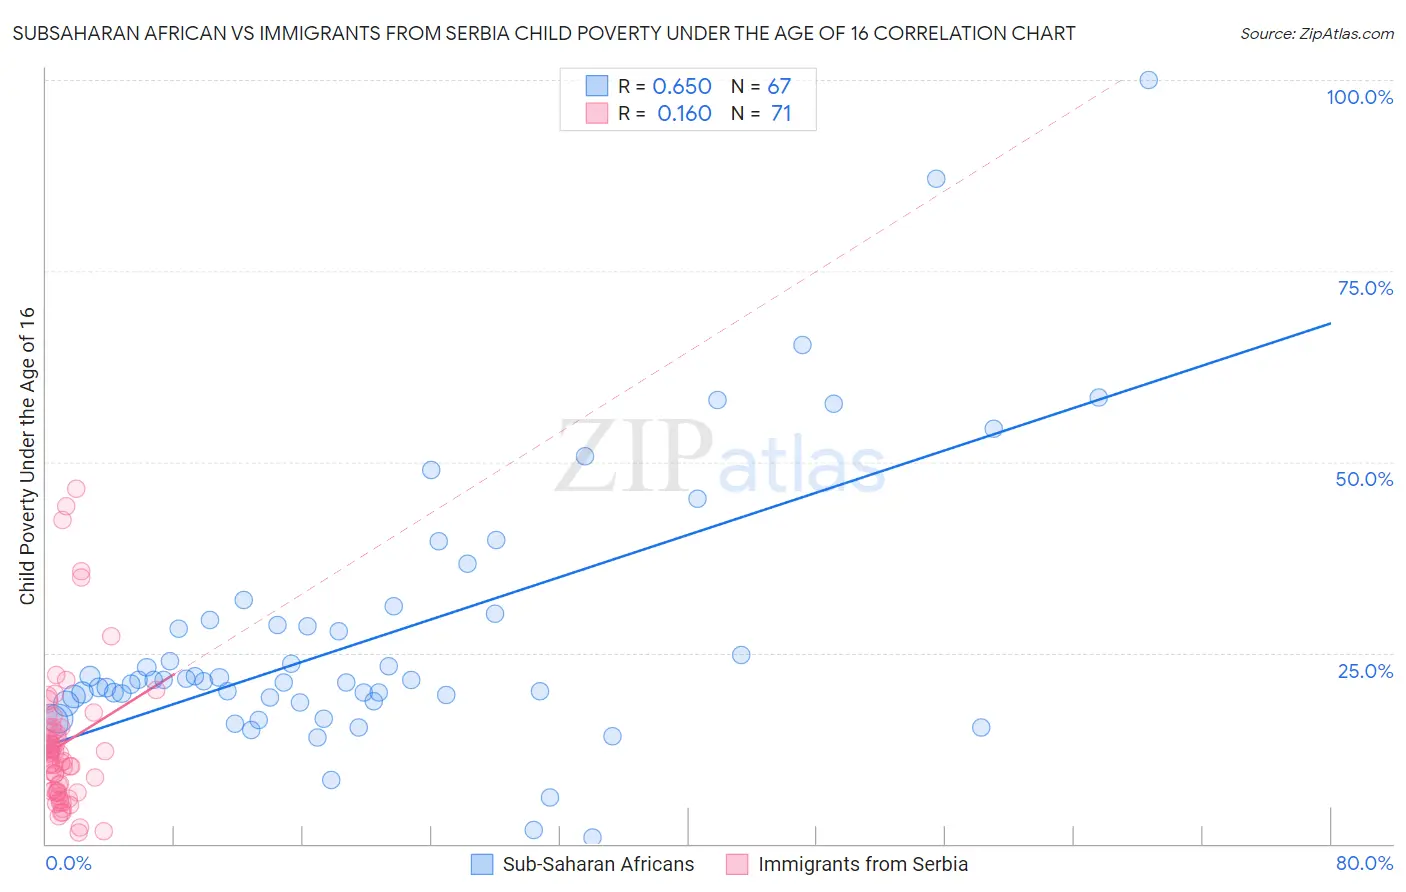 Subsaharan African vs Immigrants from Serbia Child Poverty Under the Age of 16